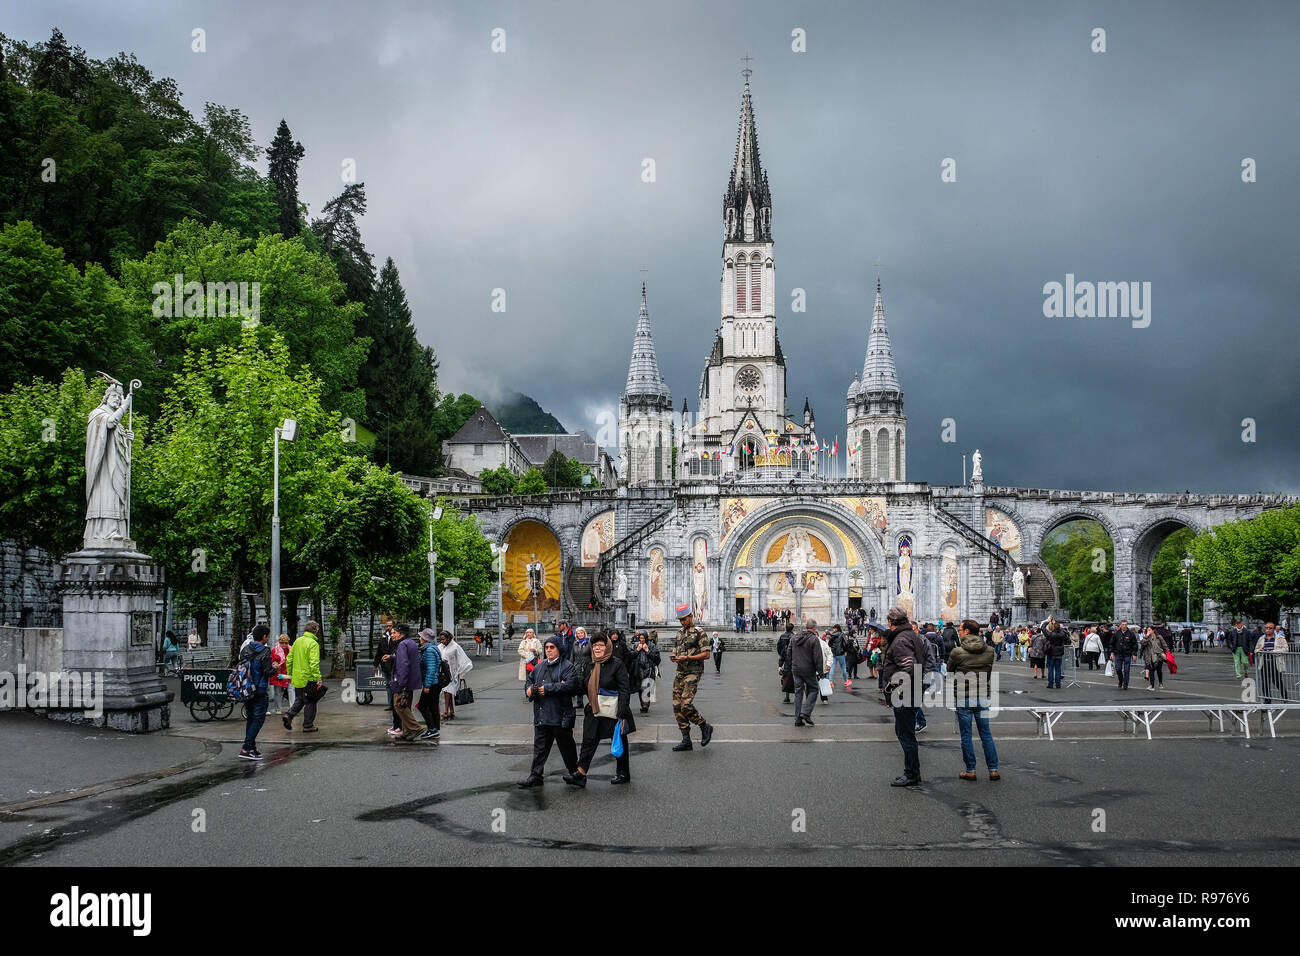 Lourdes (south-western France). 2016/05/20. Sanctuaries most visited pilgrimage shrine in France. The Rosary Basilica and the Basilica of the Immaculate Conception, commonly known as the Upper Basilica, are situated by the the Gave de Lourdes river within the Sanctuary of our Lady of Lourdes. Stock Photo